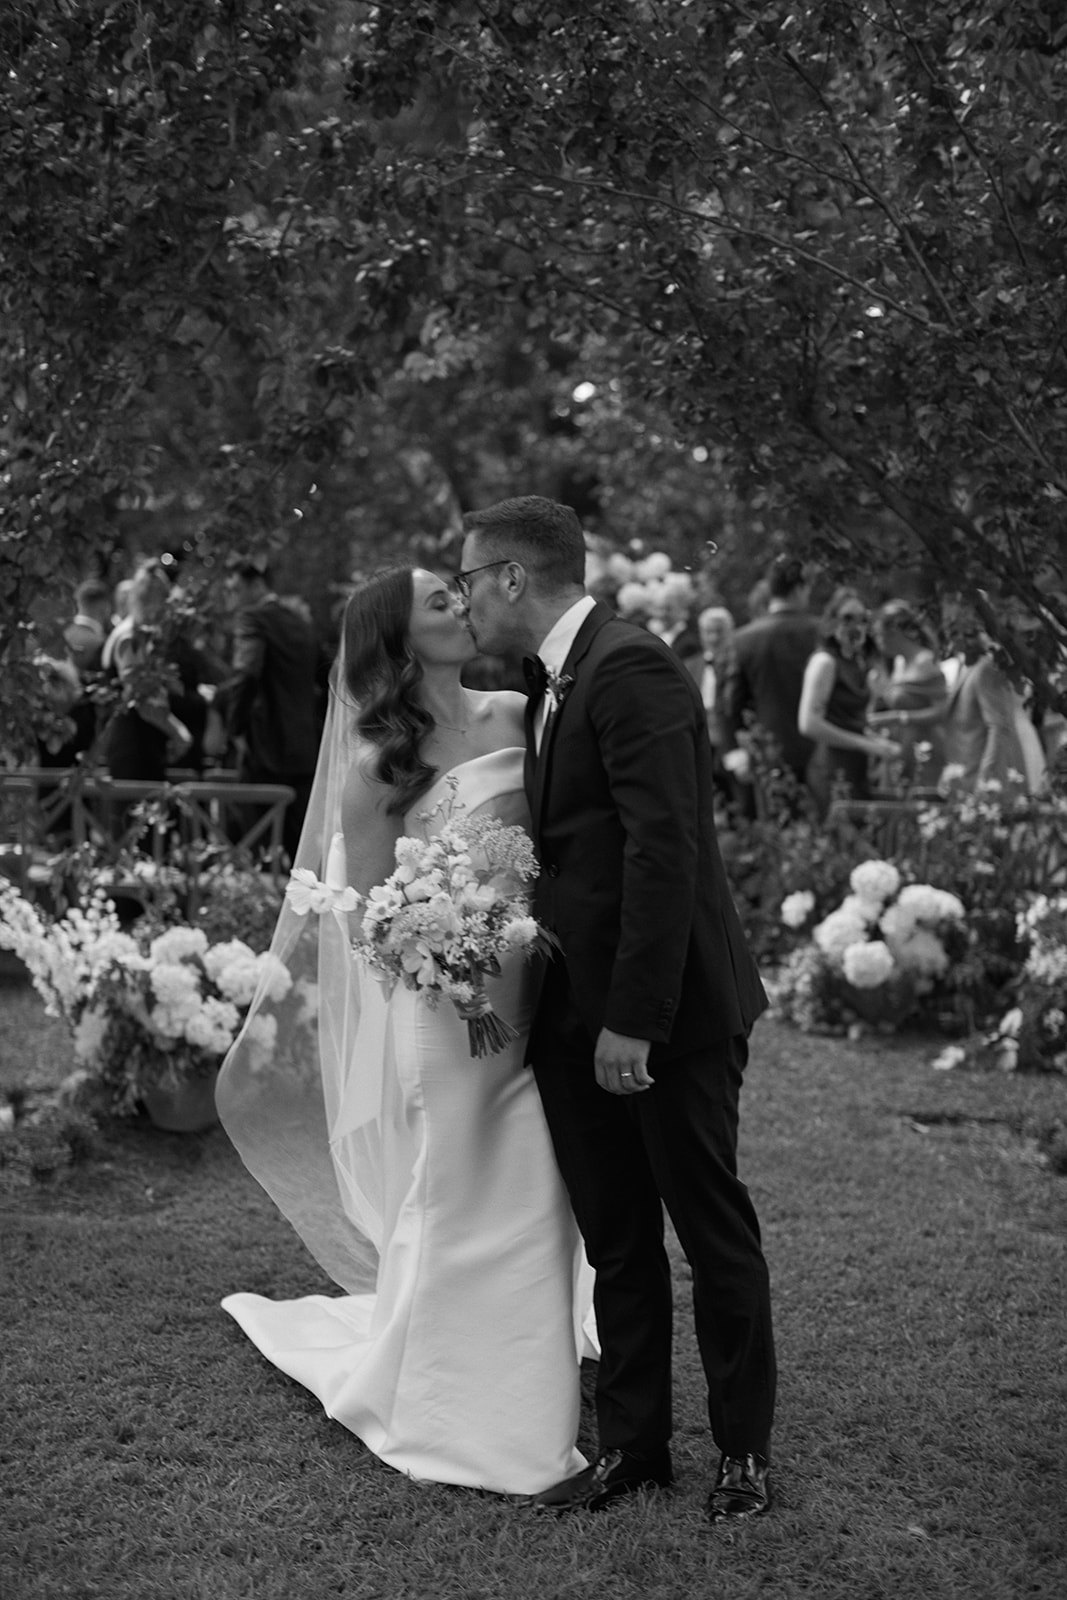 Bride and groom kissing at end of aisle